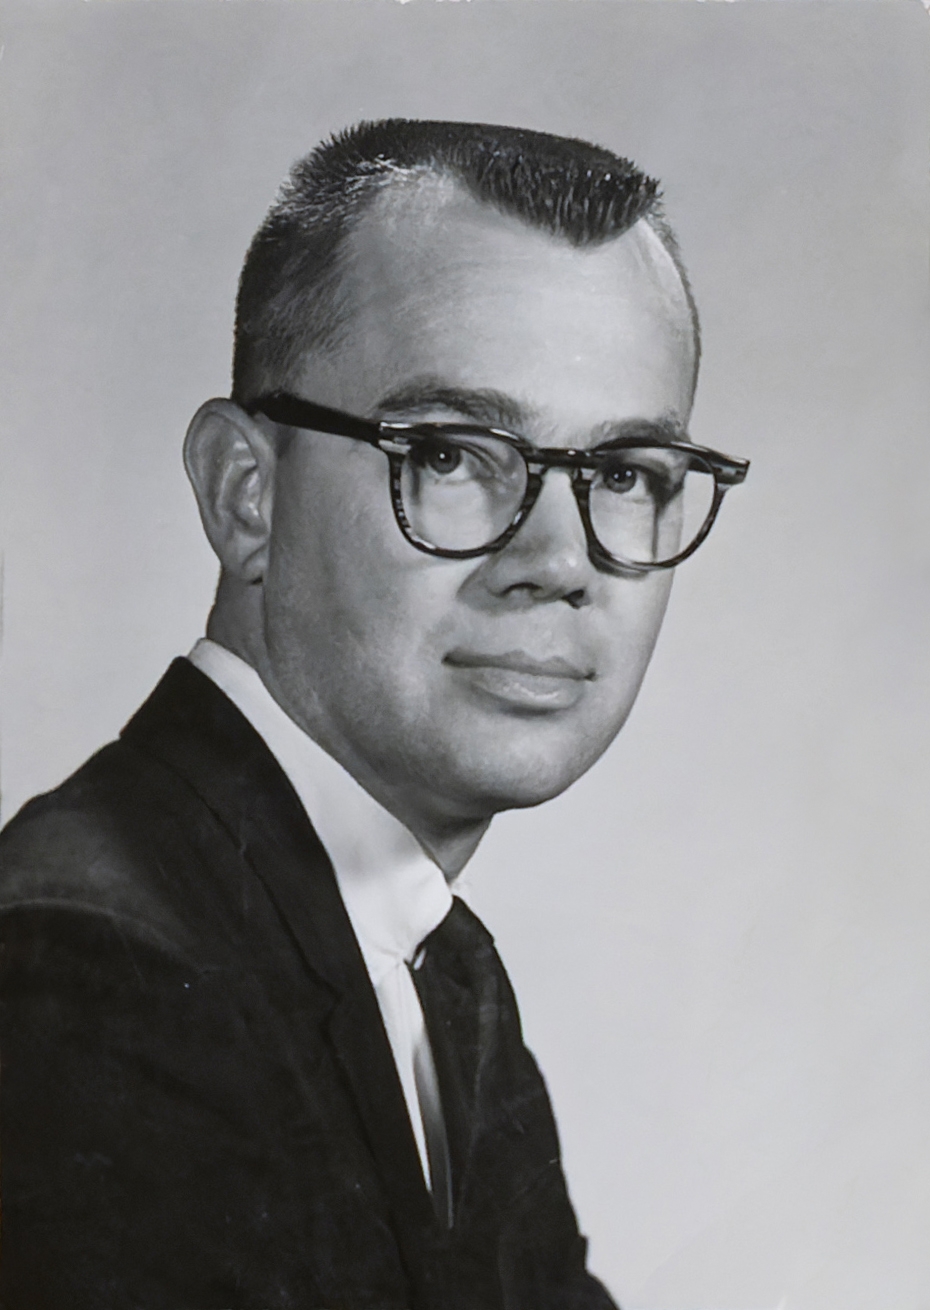 Marler began his ACU career in the publicity/communications office, and was the first full-time sports information director at the university.